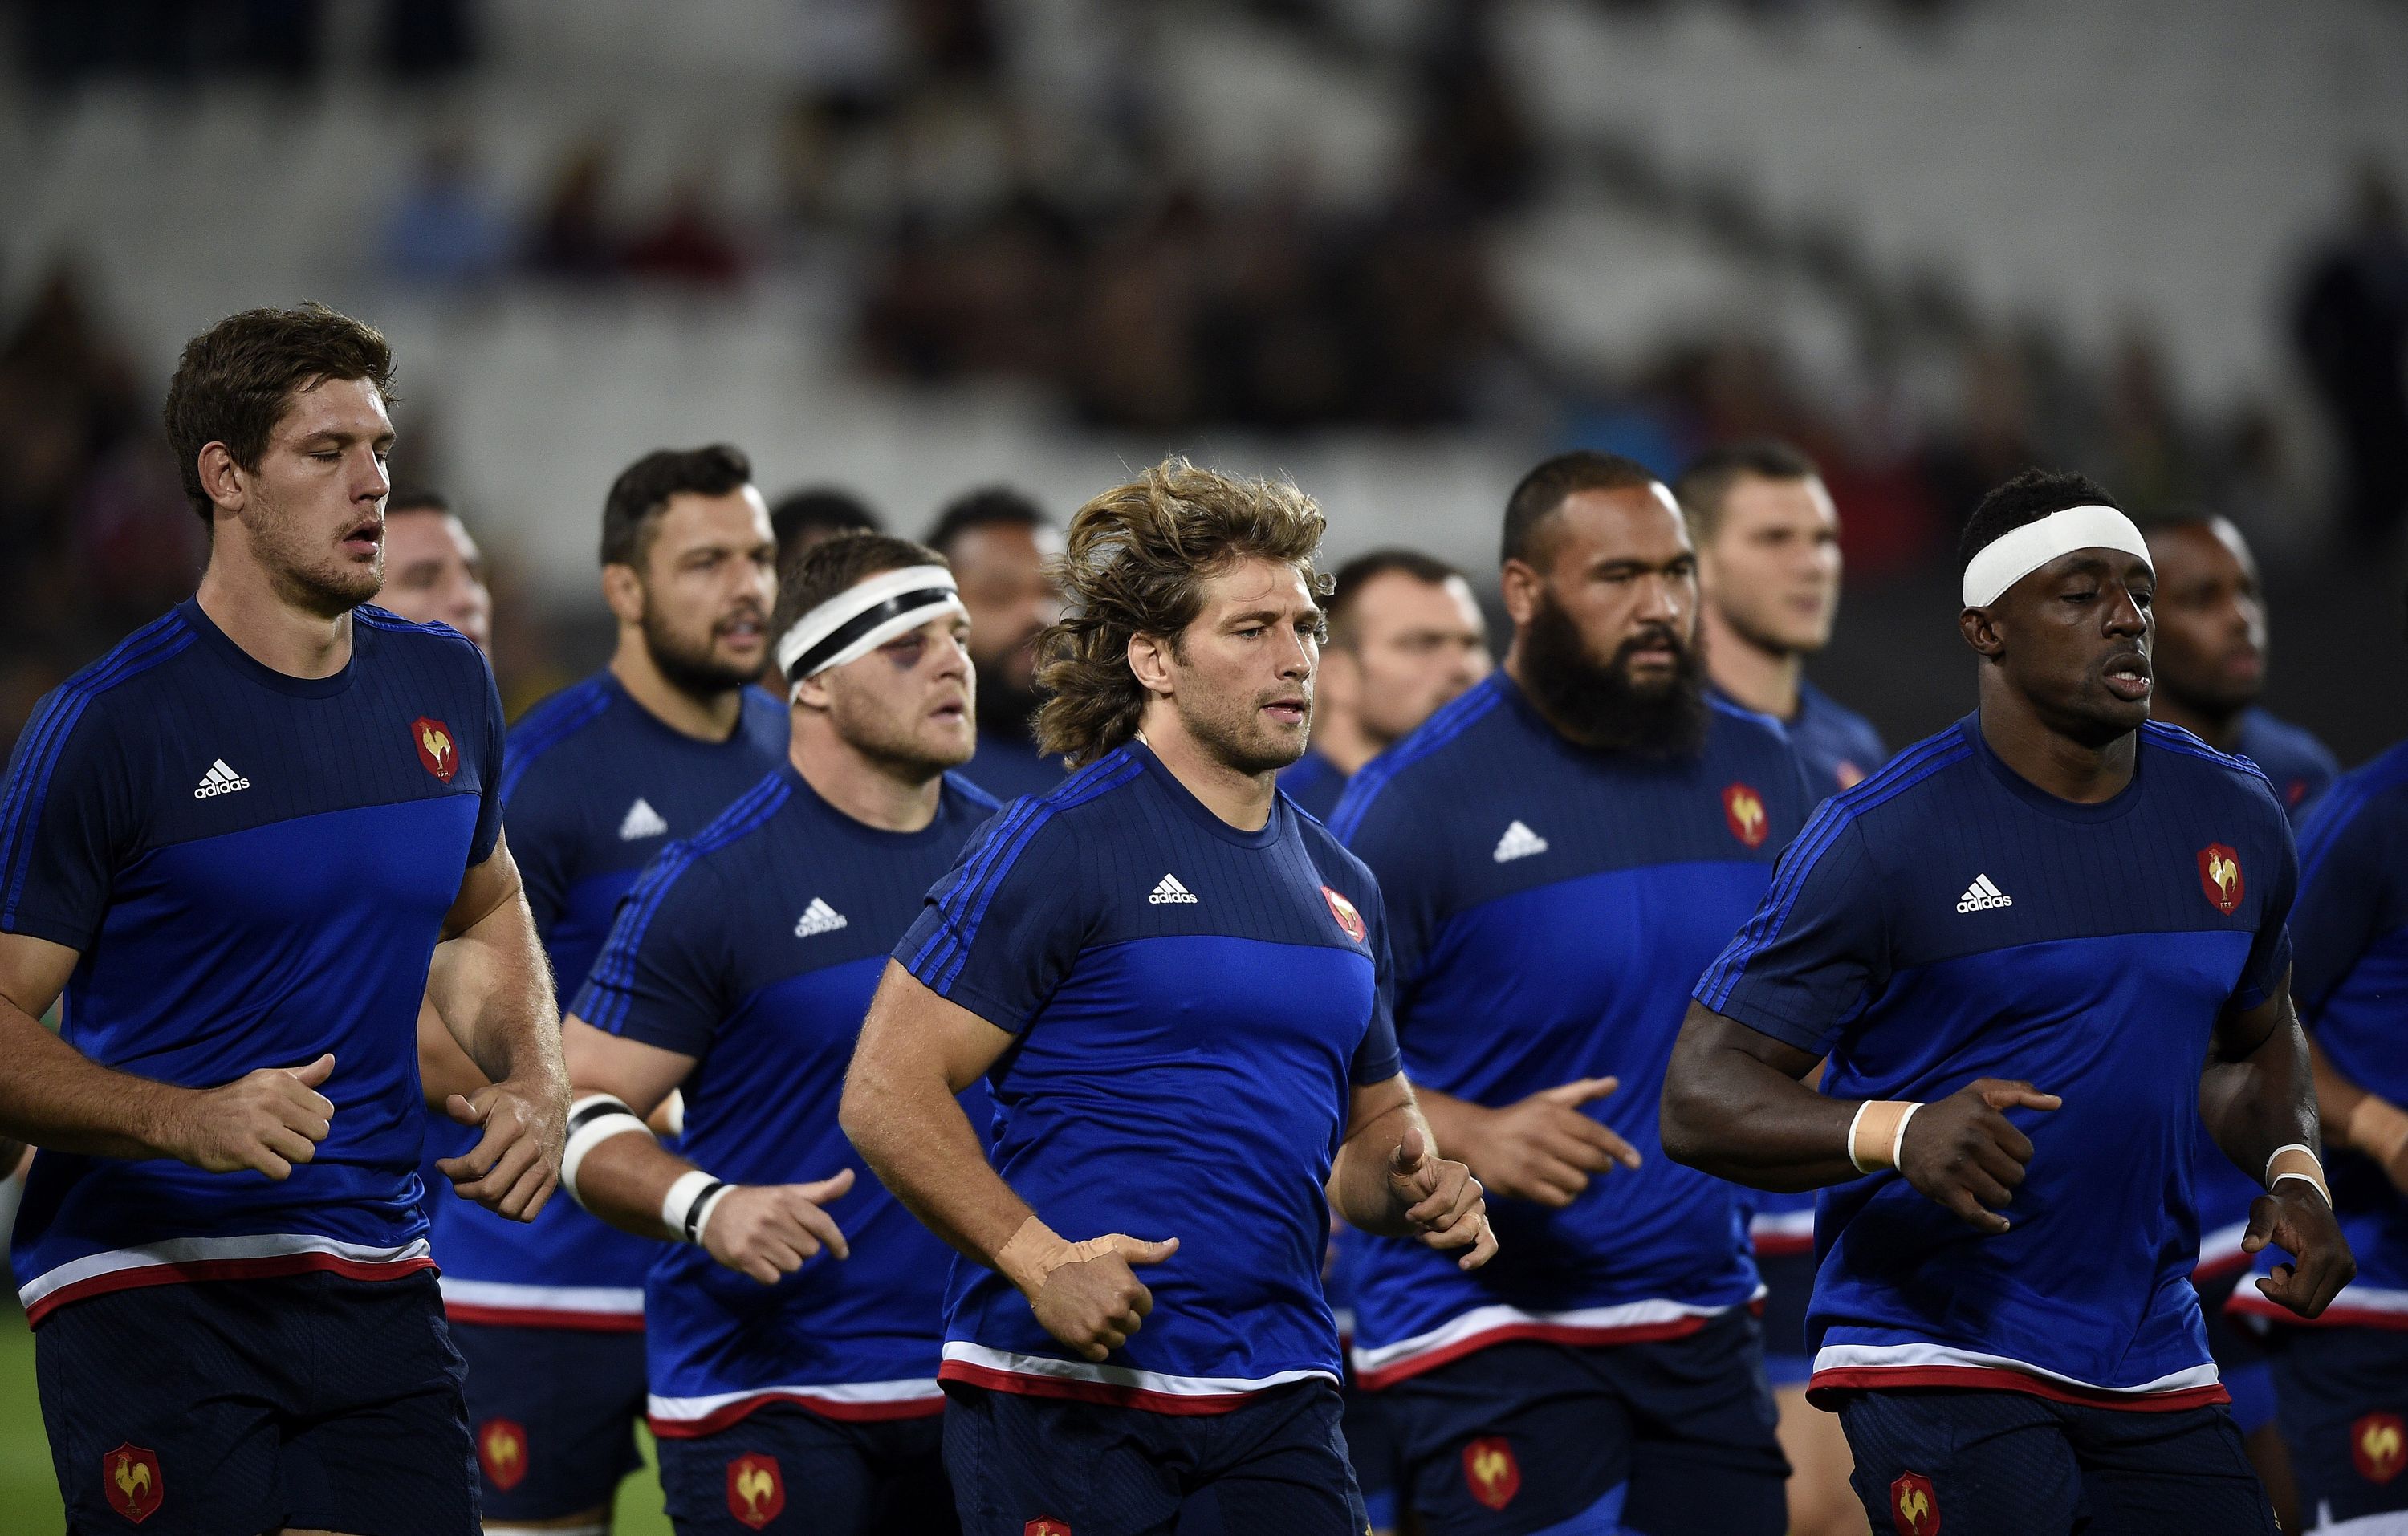 France's players warm up  prior to a Pool D match of the 2015 Rugby World Cup between France and Romania at the Olympic stadium, east London, on September 23, 2015.  AFP PHOTO / FRANCK FIFE RESTRICTED TO EDITORIAL USE, NO USE IN LIVE MATCH TRACKING SERVICES, TO BE USED AS NON-SEQUENTIAL STILLS        (Photo credit should read FRANCK FIFE/AFP/Getty Images)